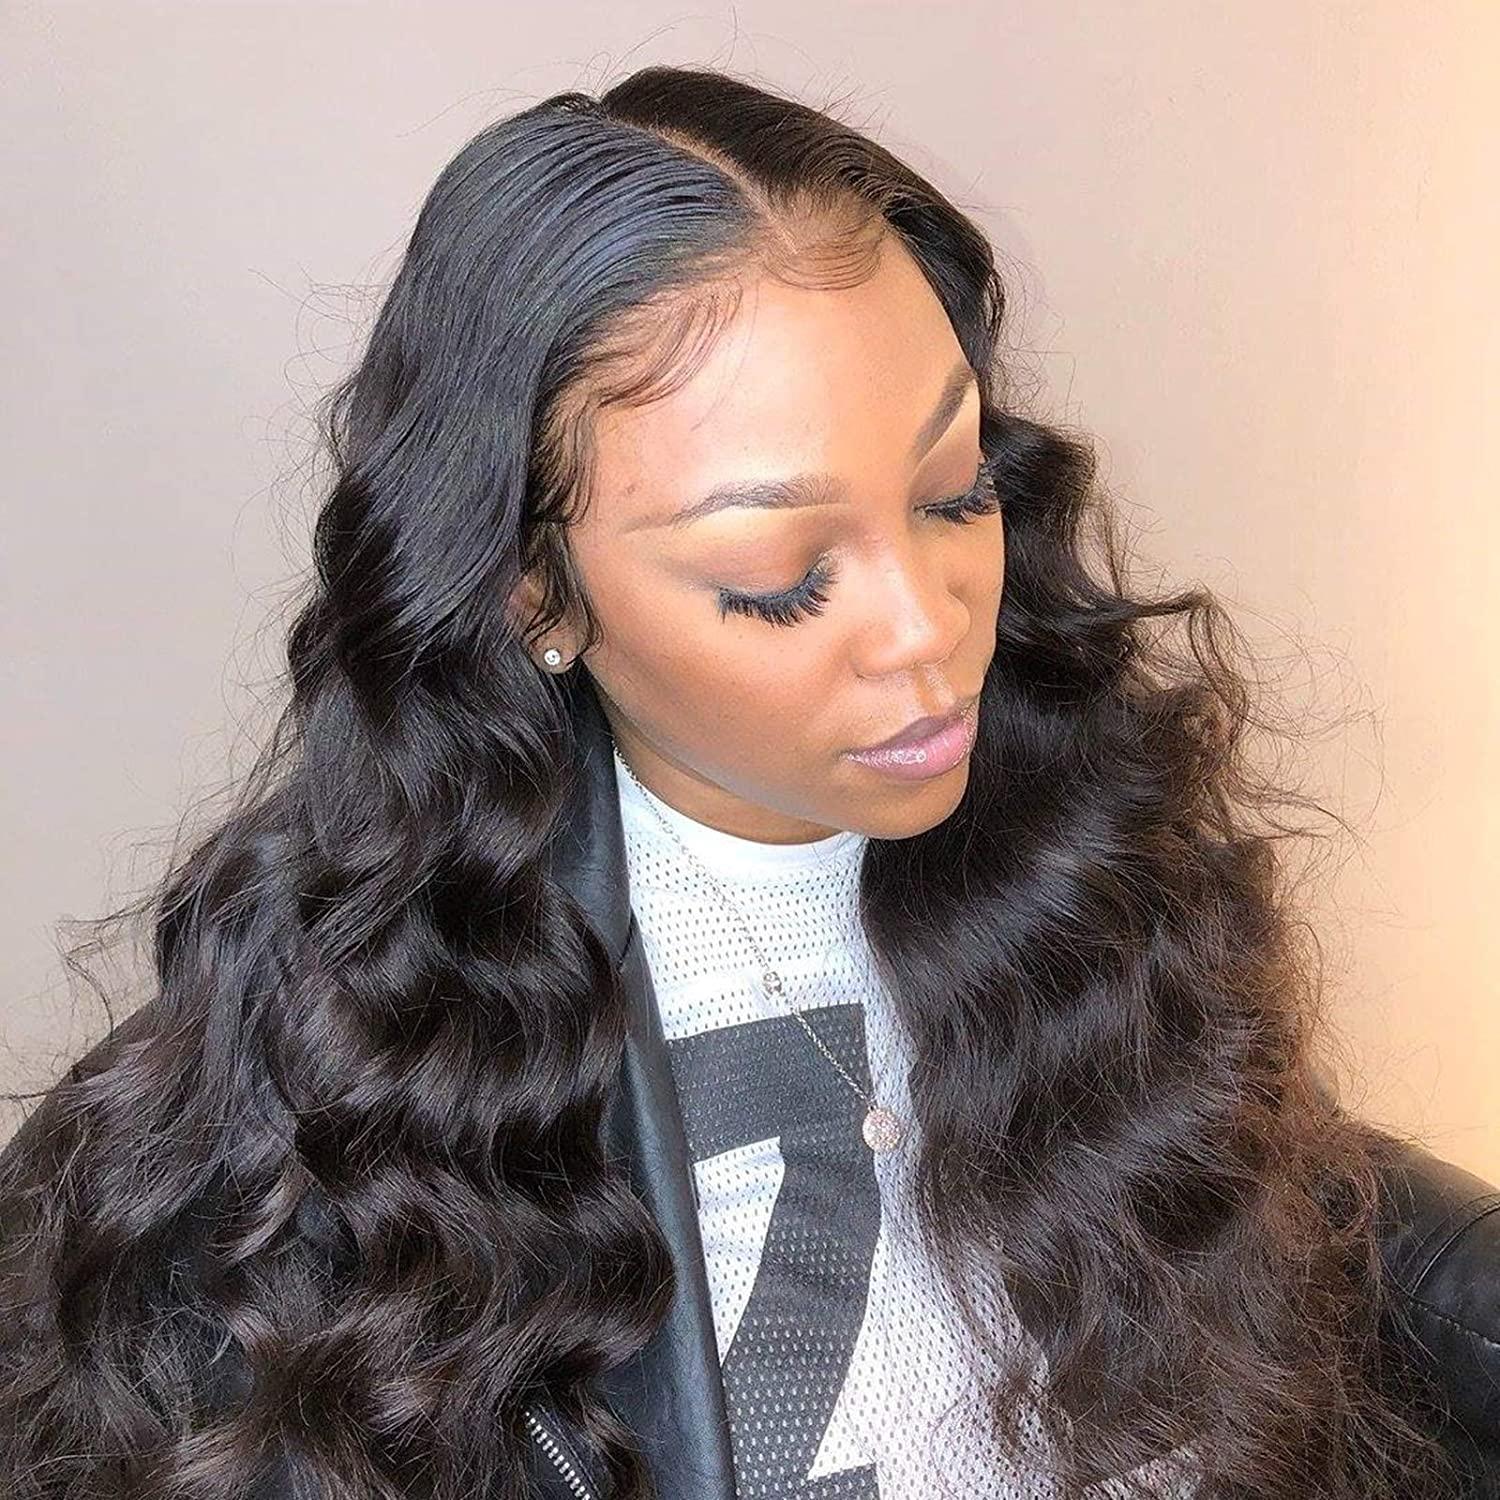 BEEOS SKINLIKE Real HD Lace Wig, 13x4 Full Frontal 0.14mm Ultra